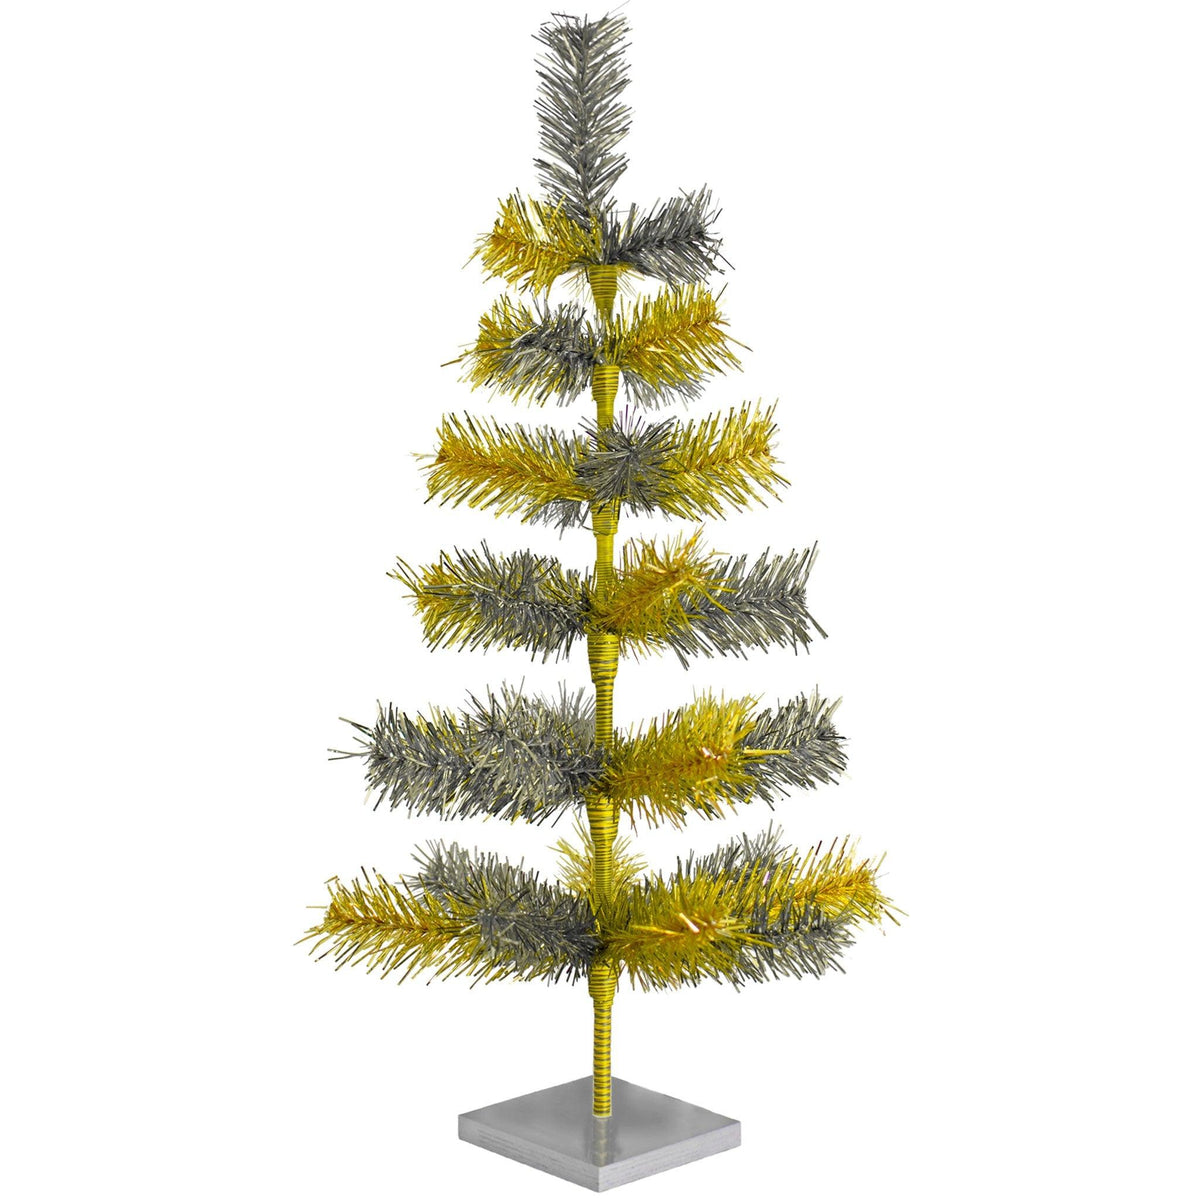 24in tall gold and silver multicolor tinsel christmas trees sold at leedisplay.com